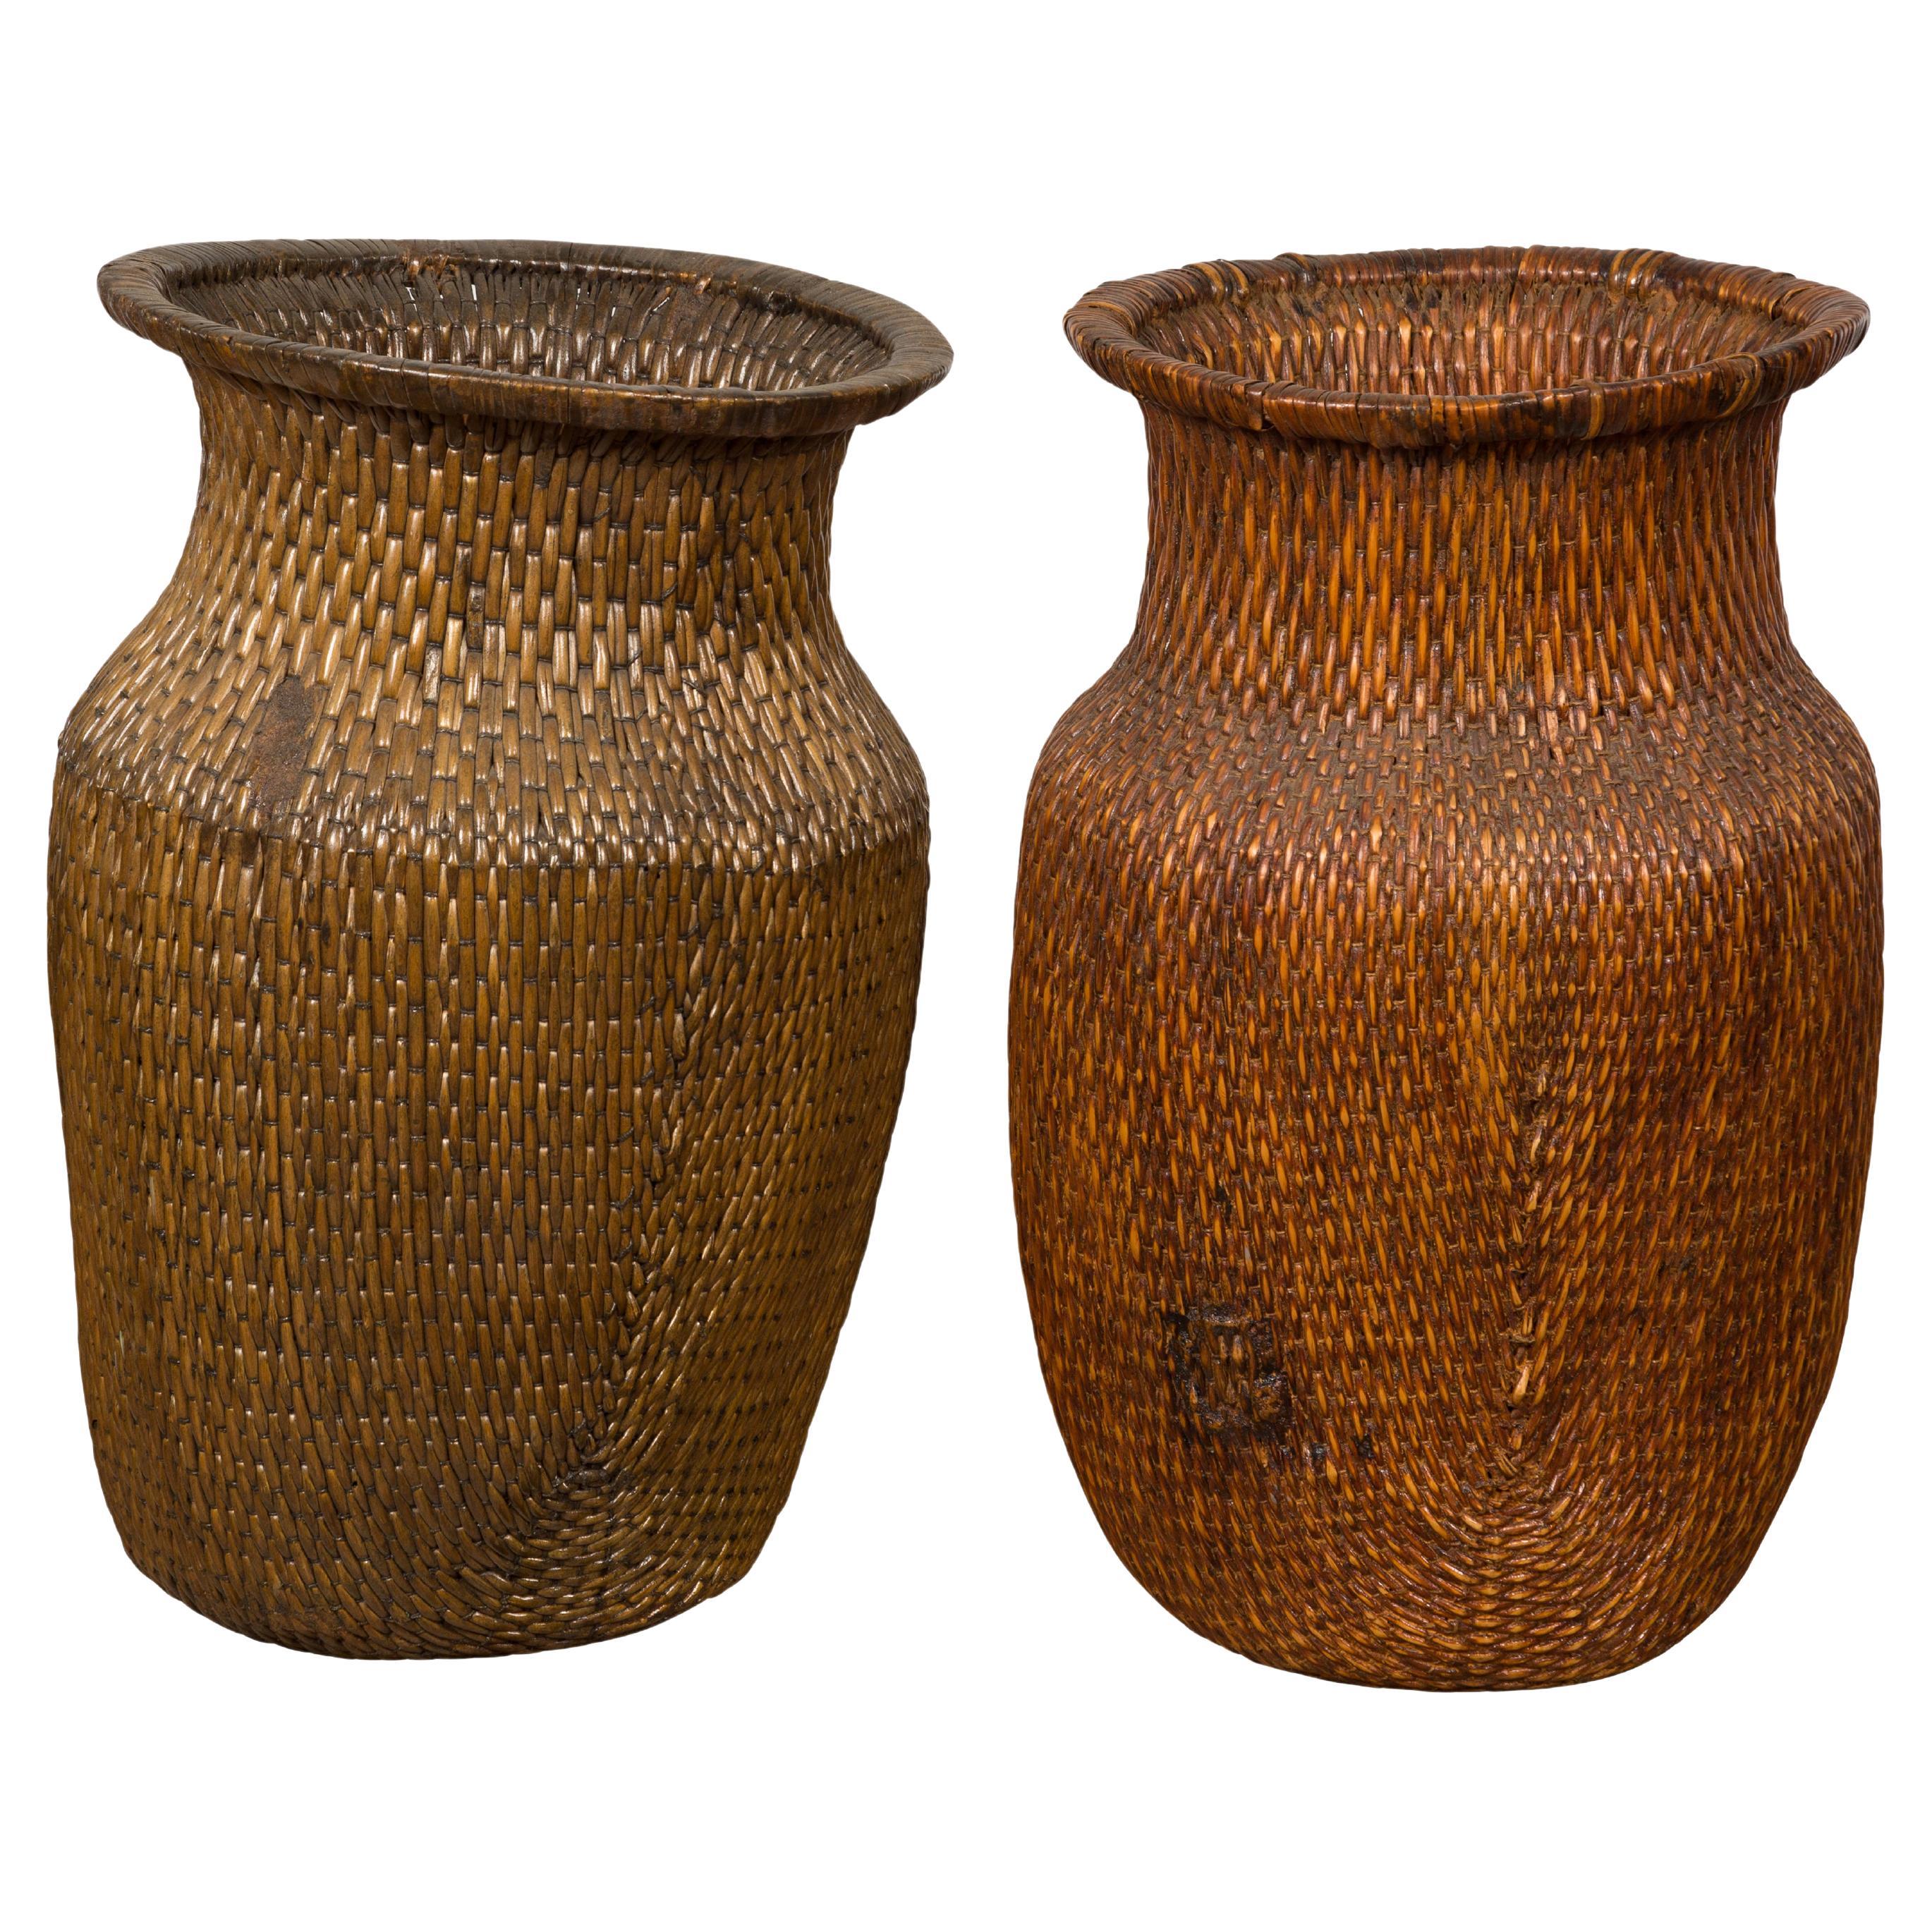 Two Oversized Chinese Rattan Grain Baskets with Flaring Necks, Sold Each For Sale